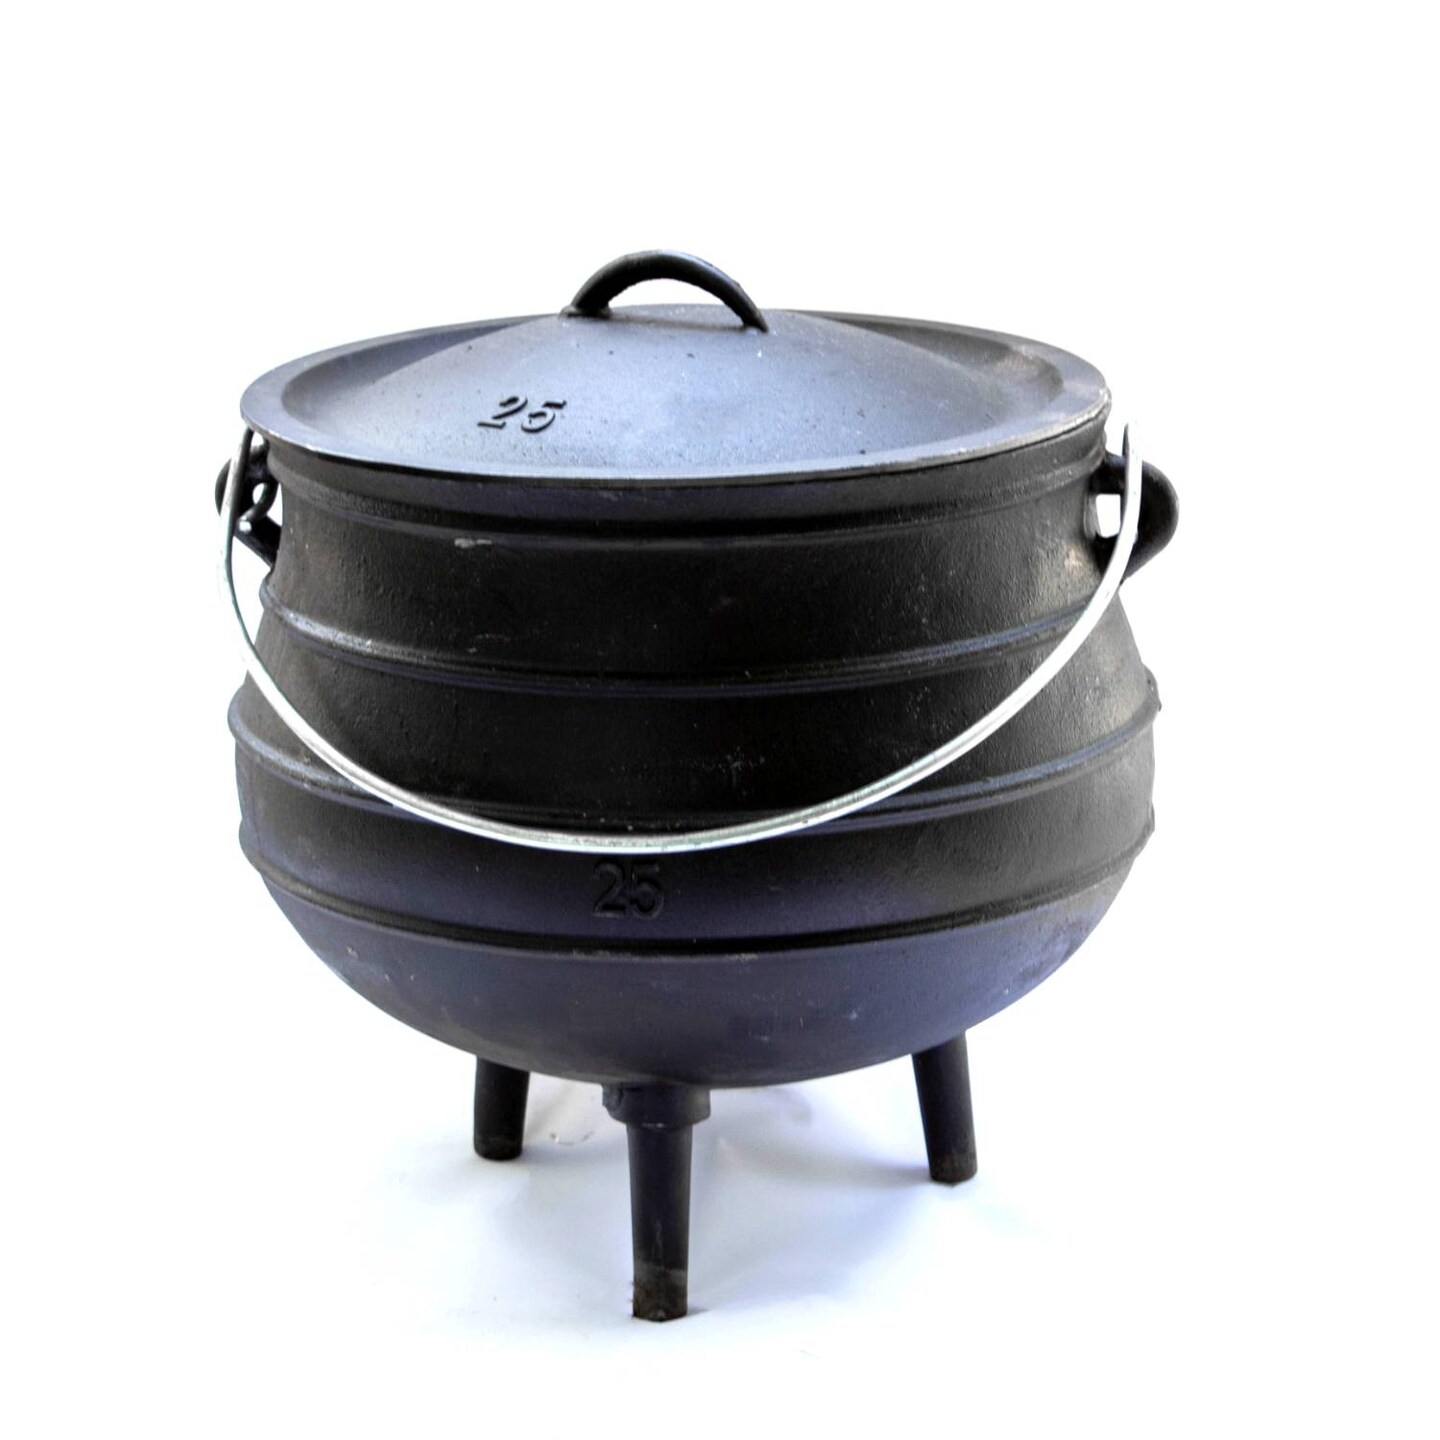 Lehman's Campfire Cooking Kettle Pot - Cast Iron Potjie Dutch Oven with 3  Legs and Lid